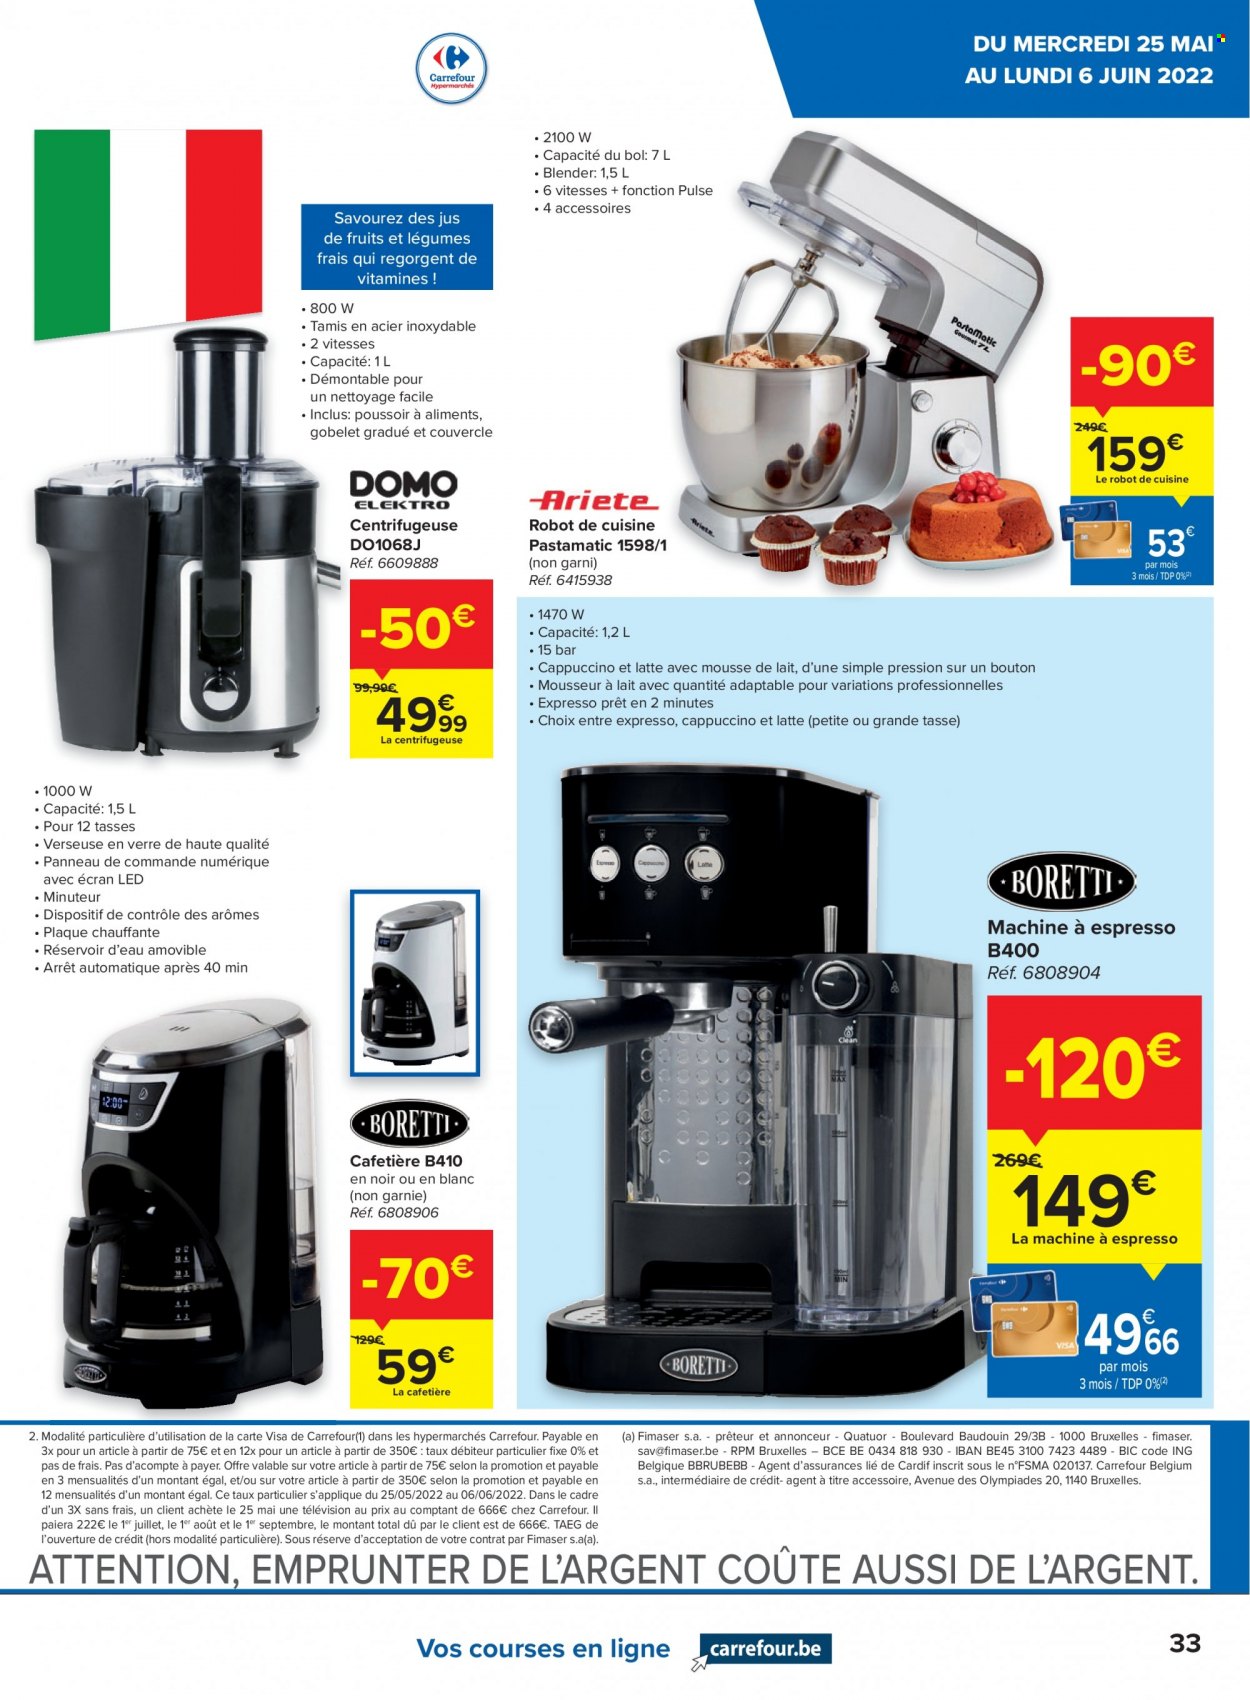 Catalogue Carrefour hypermarkt - 25.5.2022 - 31.5.2022. Page 33.